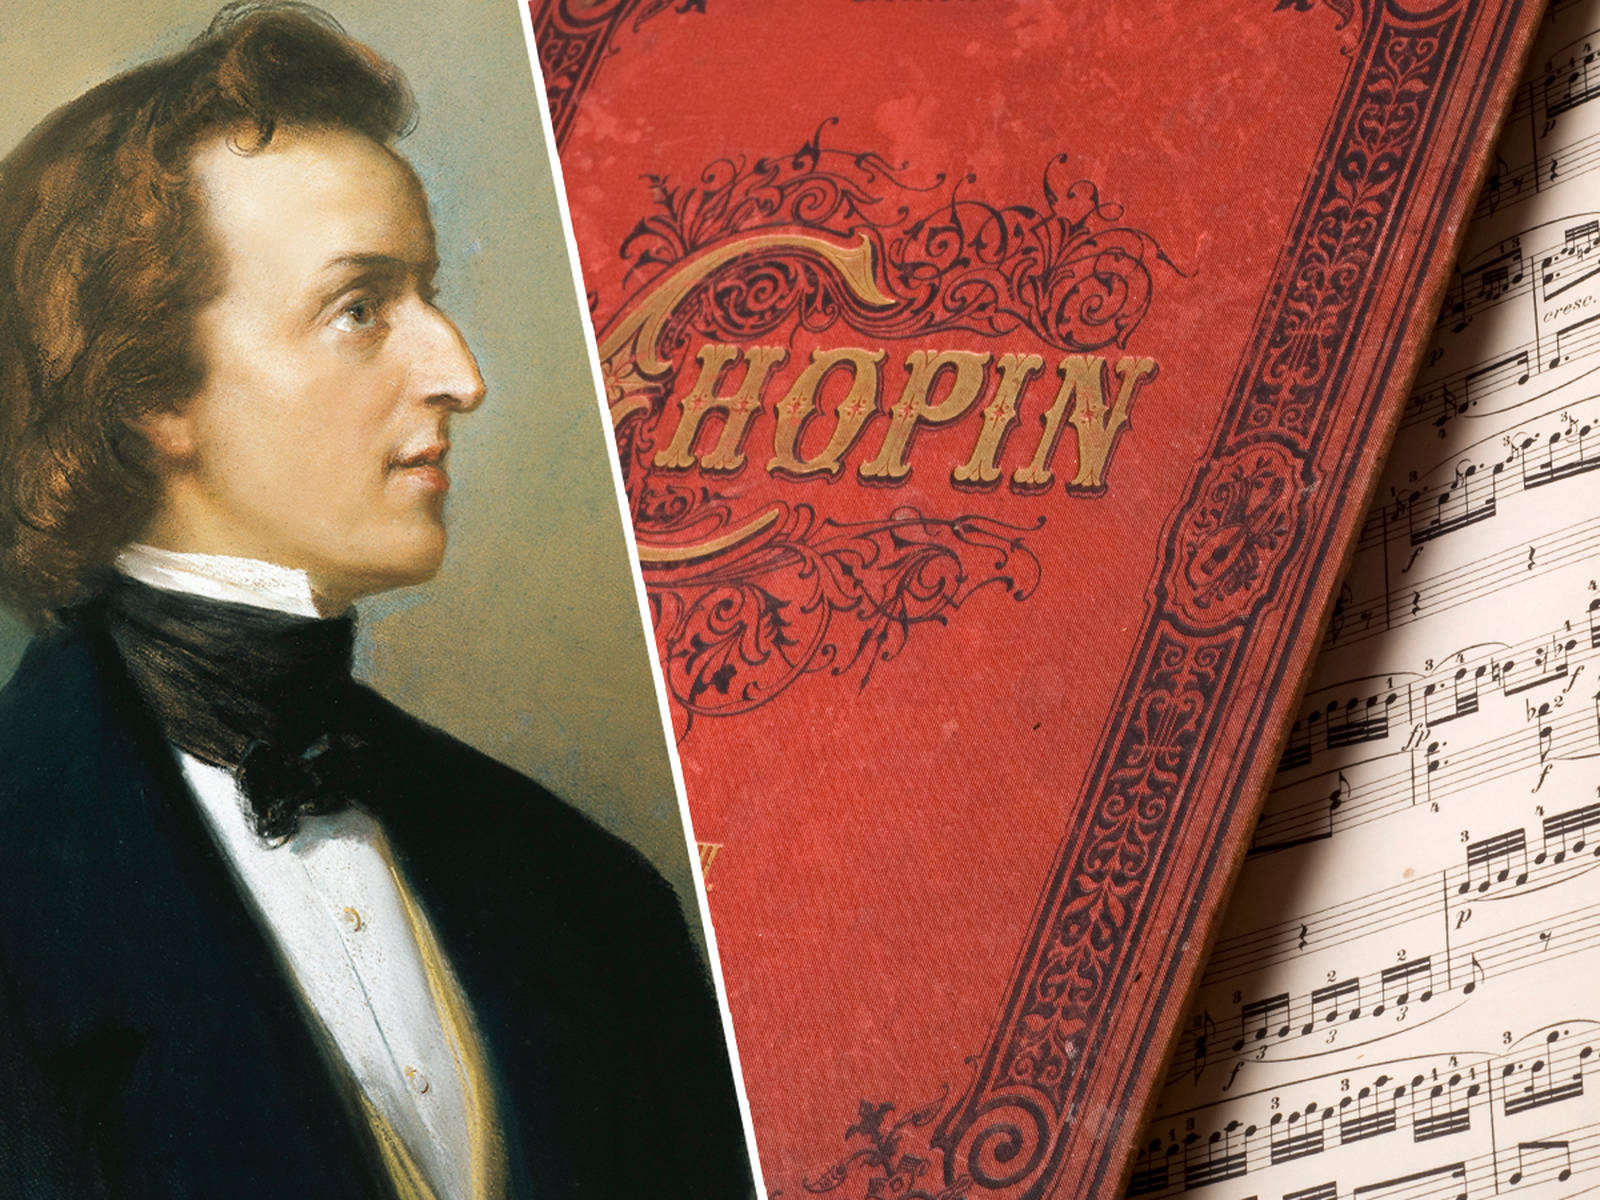 Best Chopin music: 10 essential pieces by the Romantic composer - Classic FM